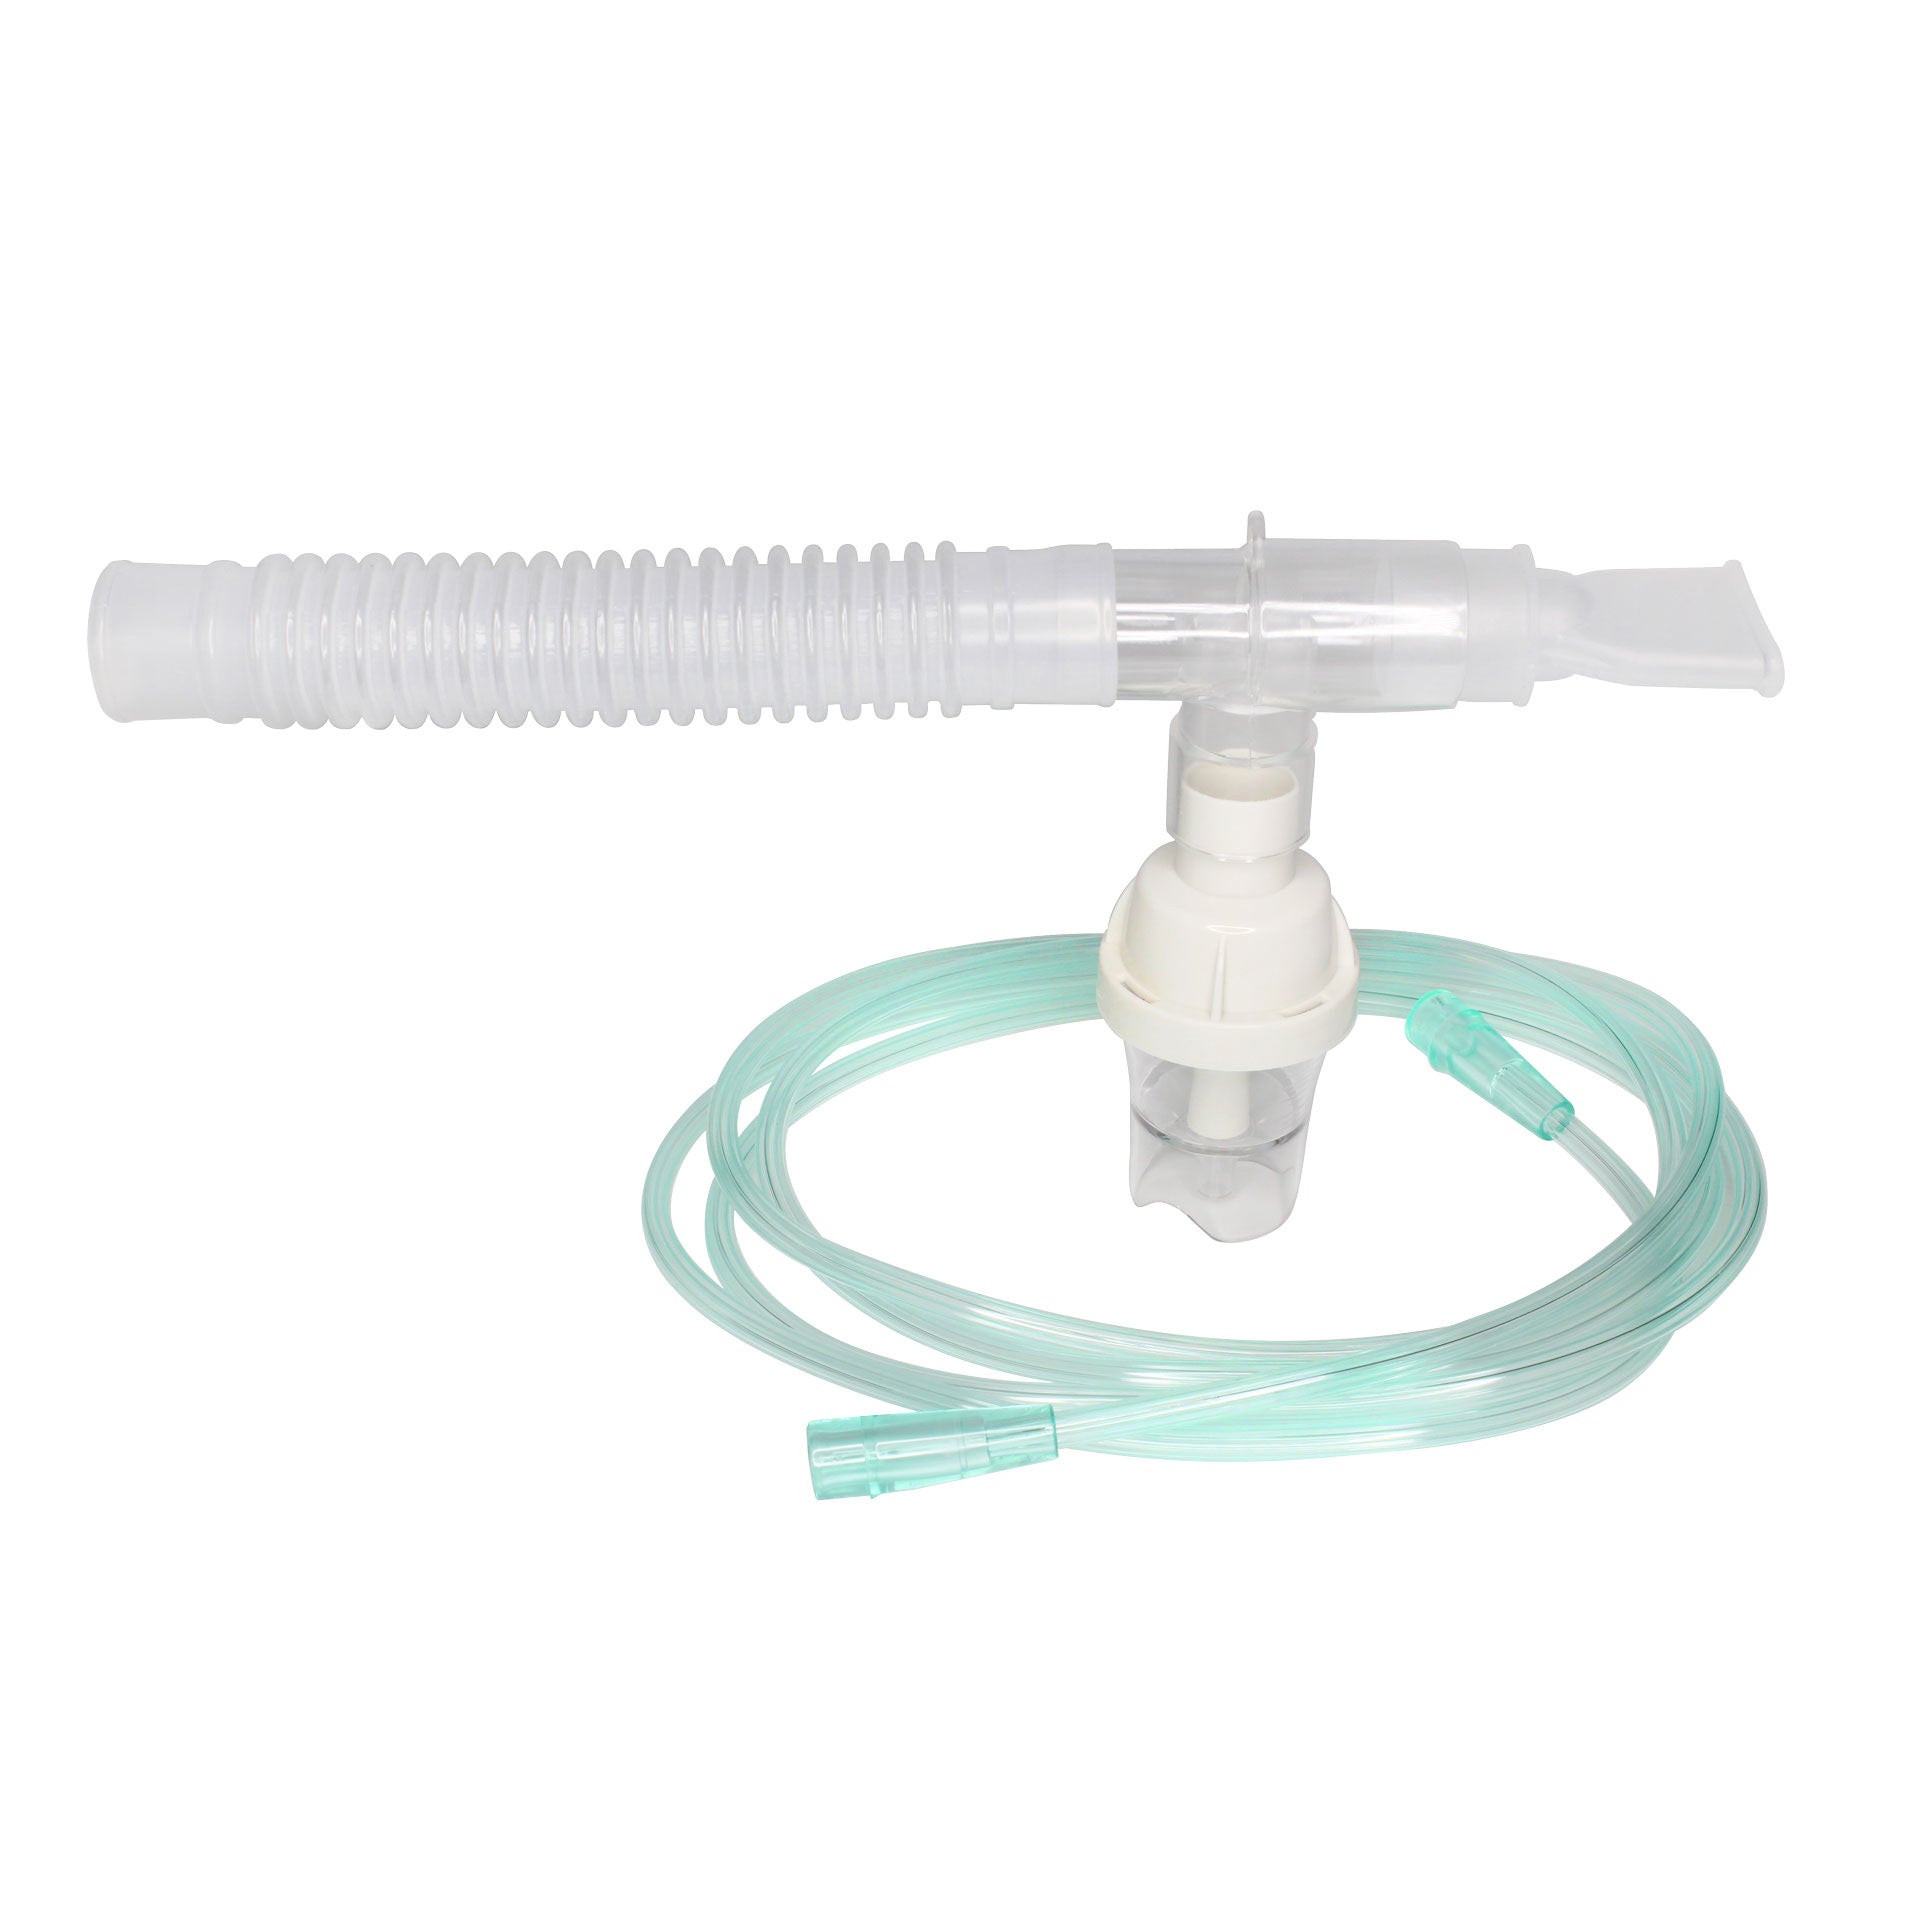 Universal Reusable Nebulizer Kit with T-Piece